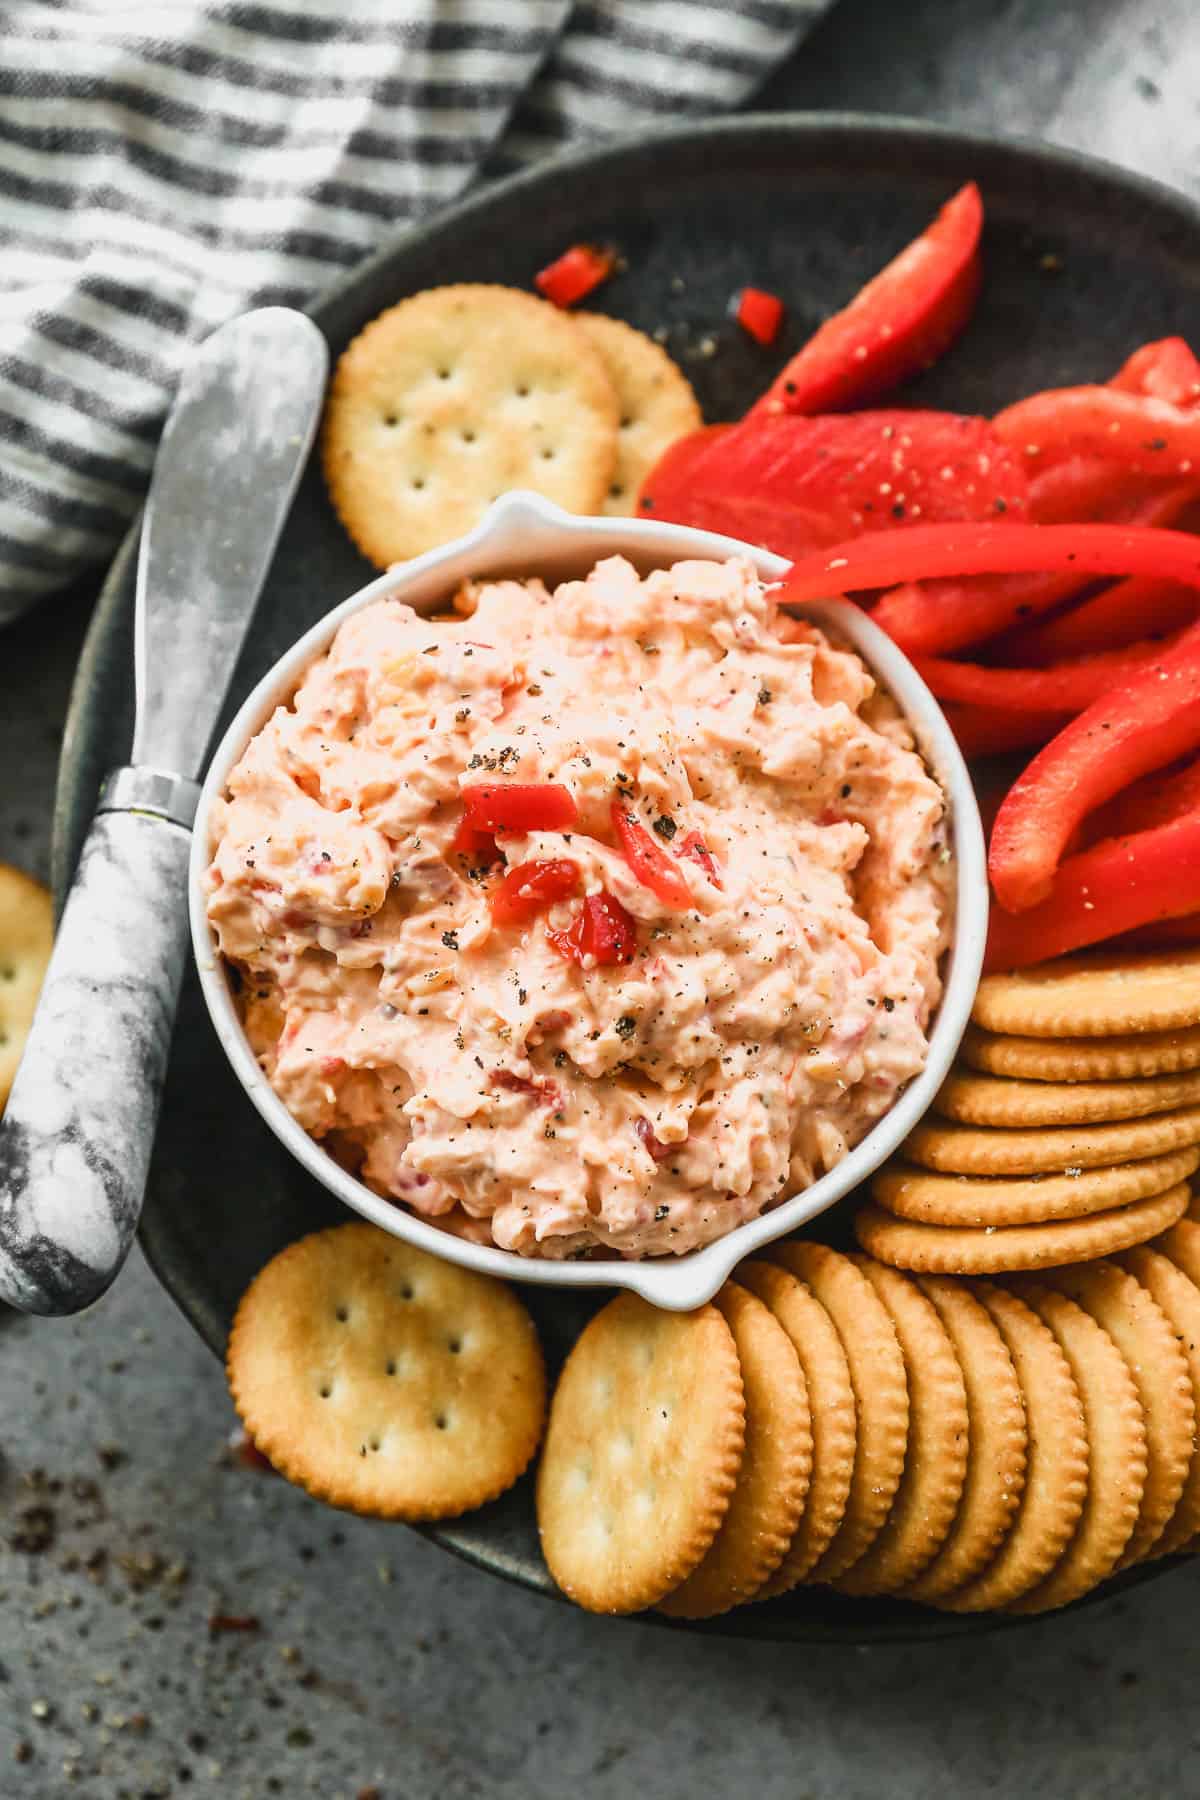 The BEST Pimento Cheese Dip on a plate next to sliced red peppers and crackers for dipping.